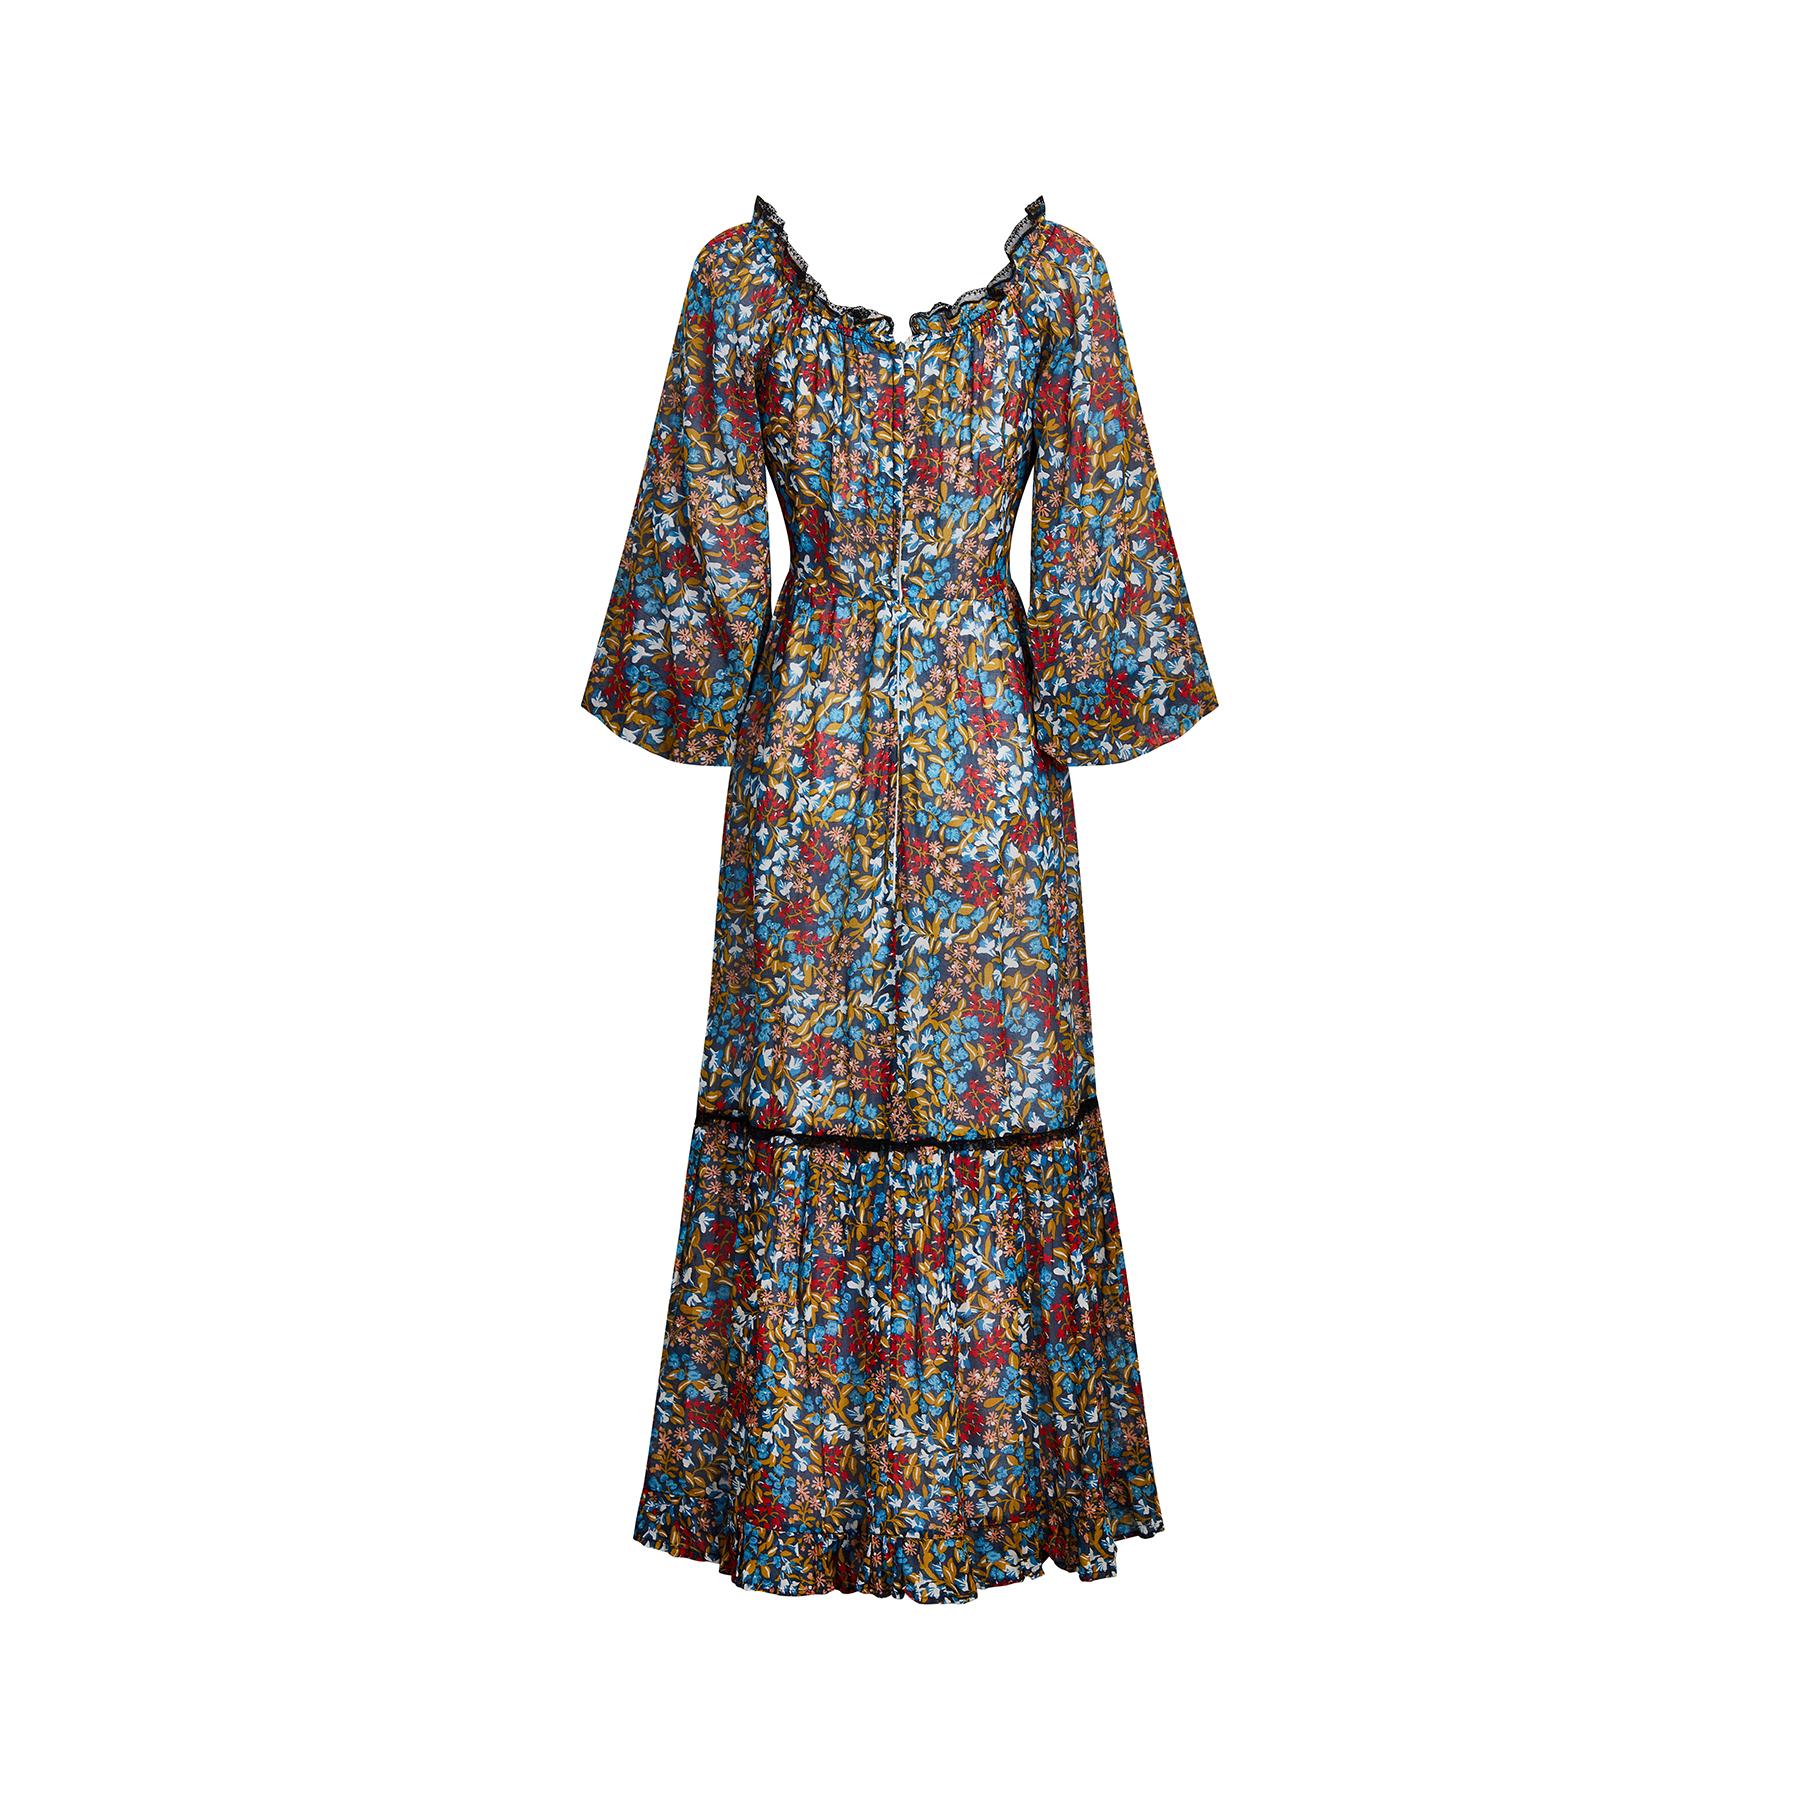 This original 1970s boho maxi dress is by upmarket British boutique label Angela Gore has a really fantastic mixed floral print; we can identify fuchsias and snowbells amongst others. It has an empire waistband and a floor length A-line skirt with a